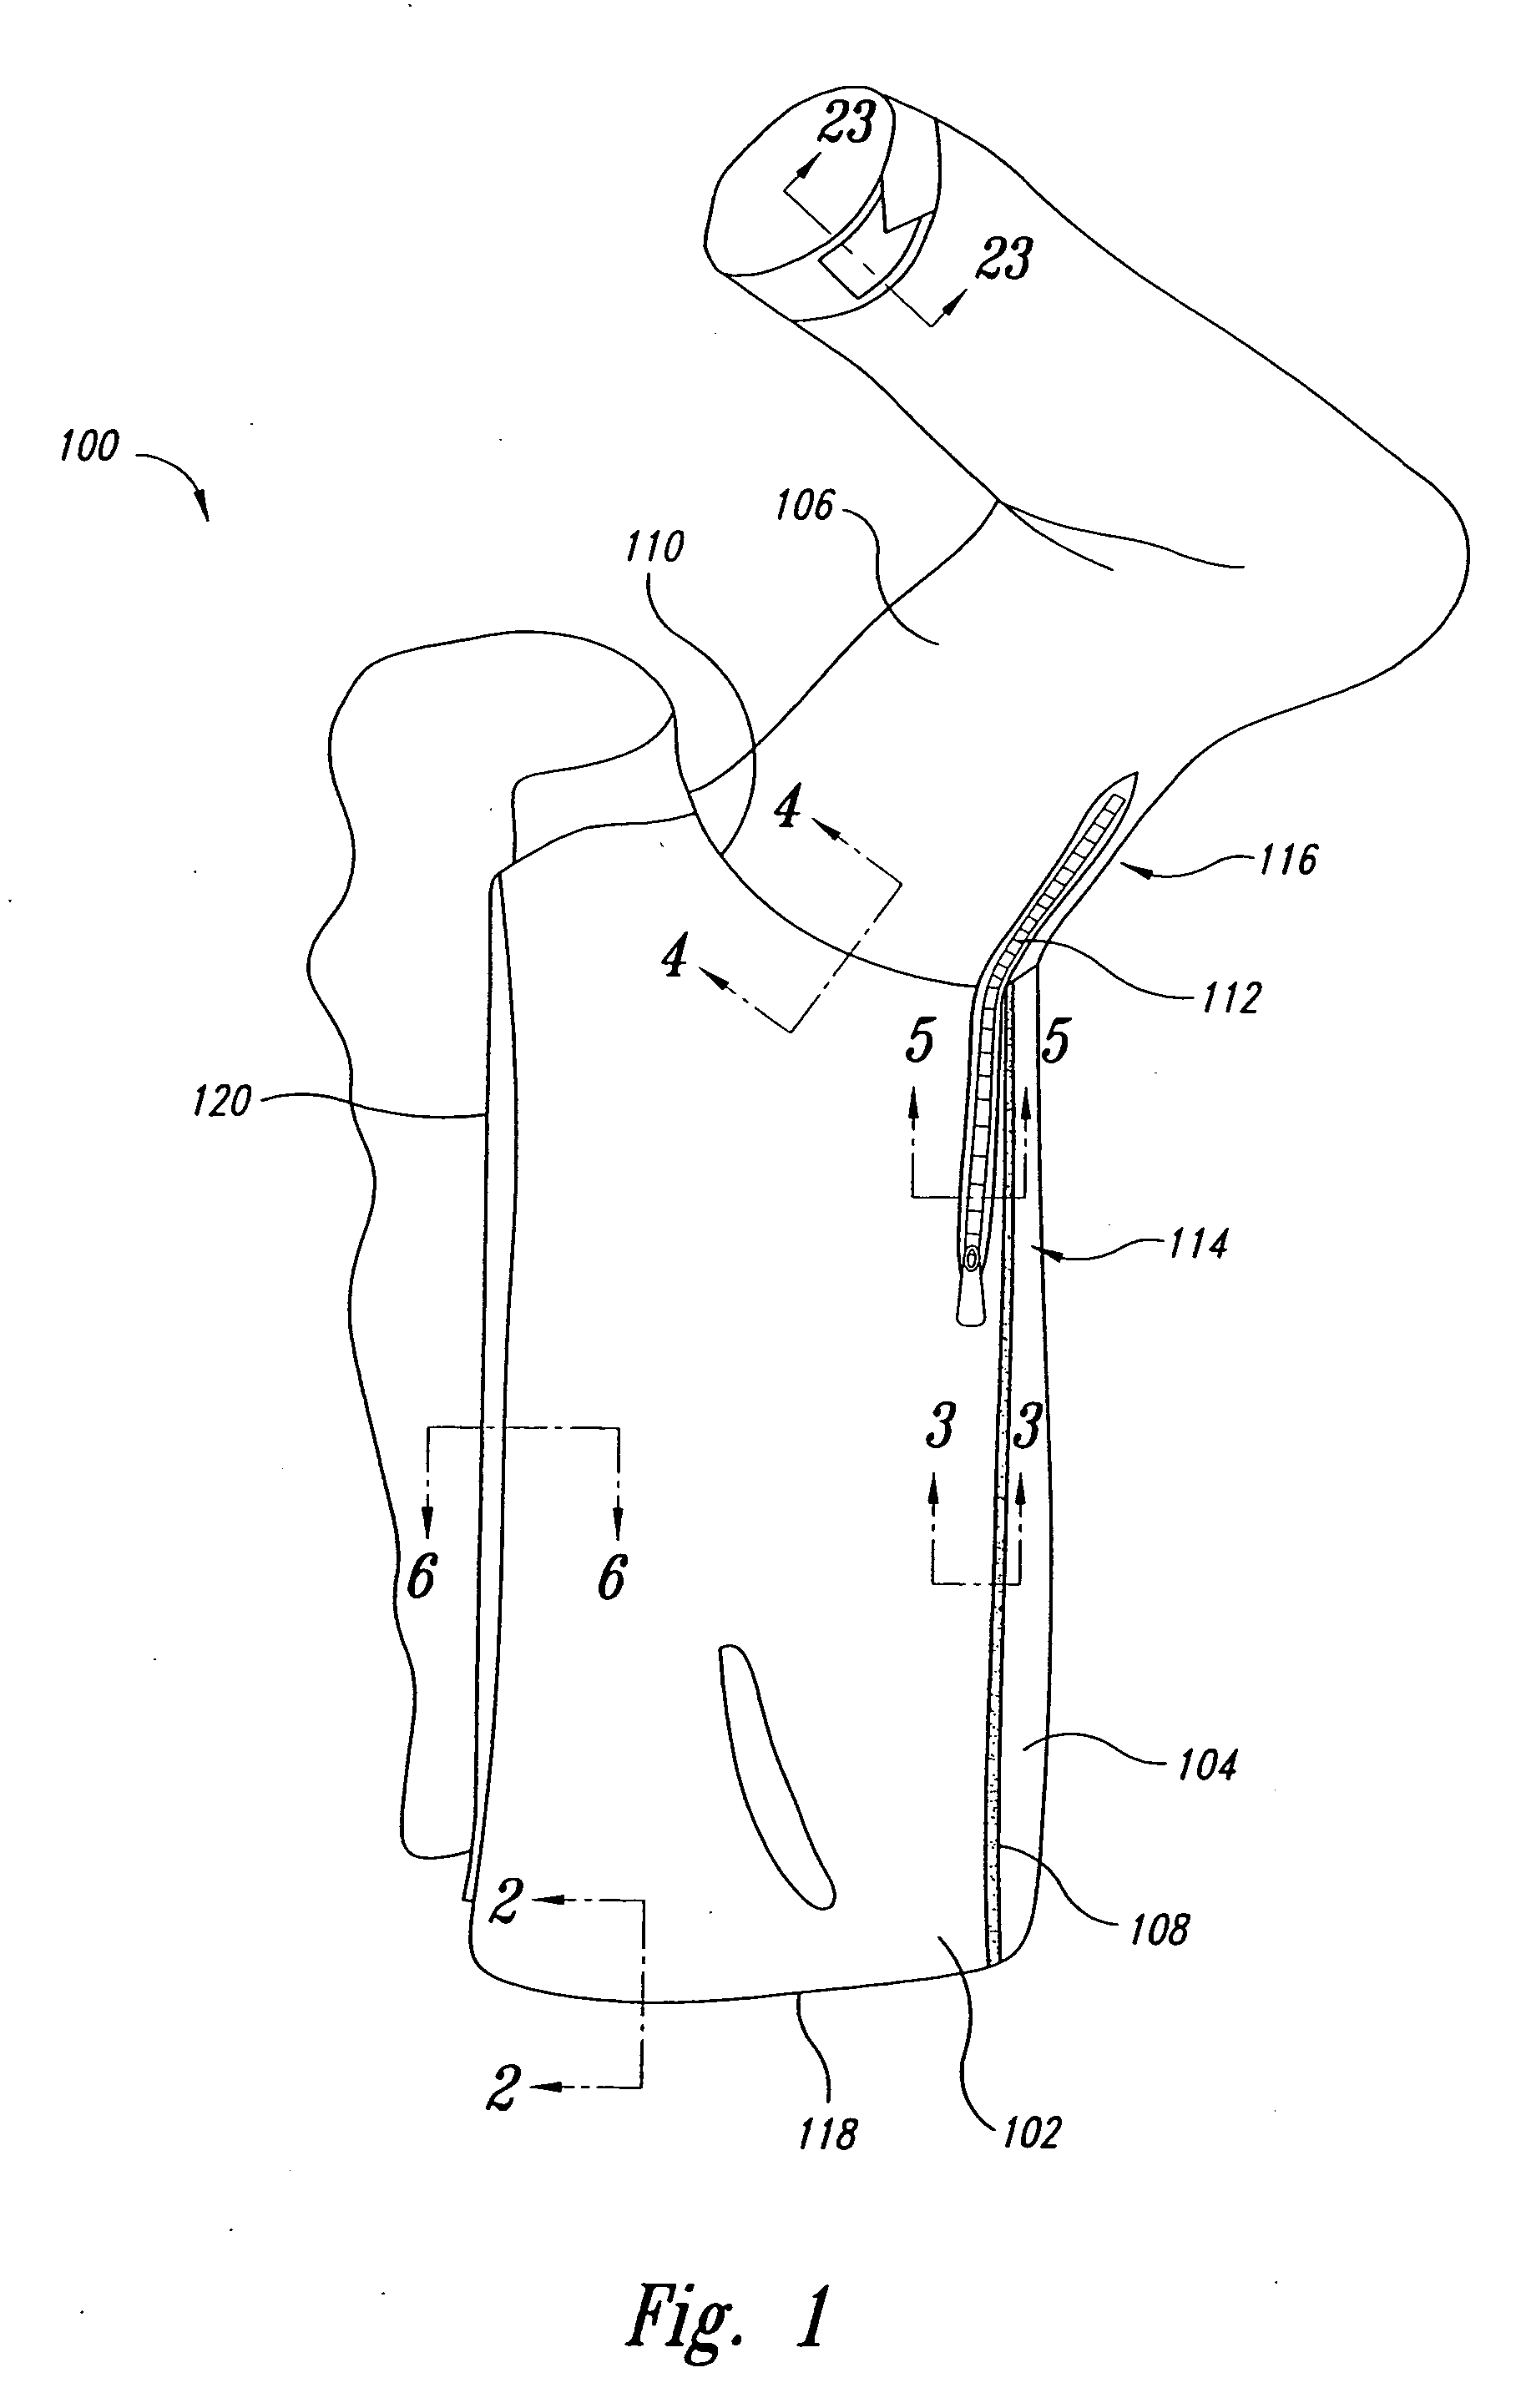 Hems, edges, patches and seams for durable, water repellant woven fabric, and methods for making the same